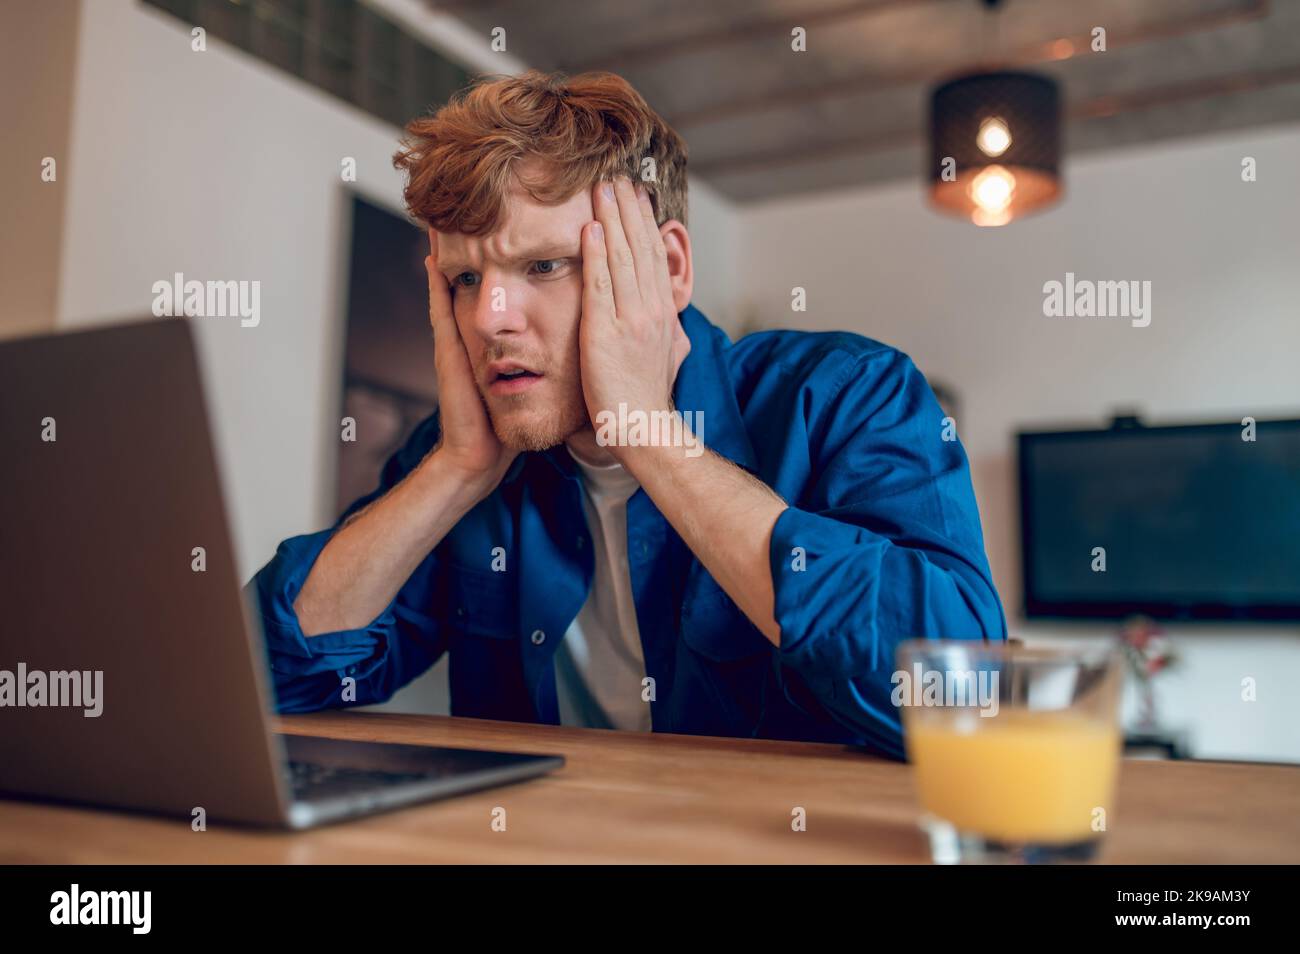 Ginger man reading something onlines and looking shocked Stock Photo